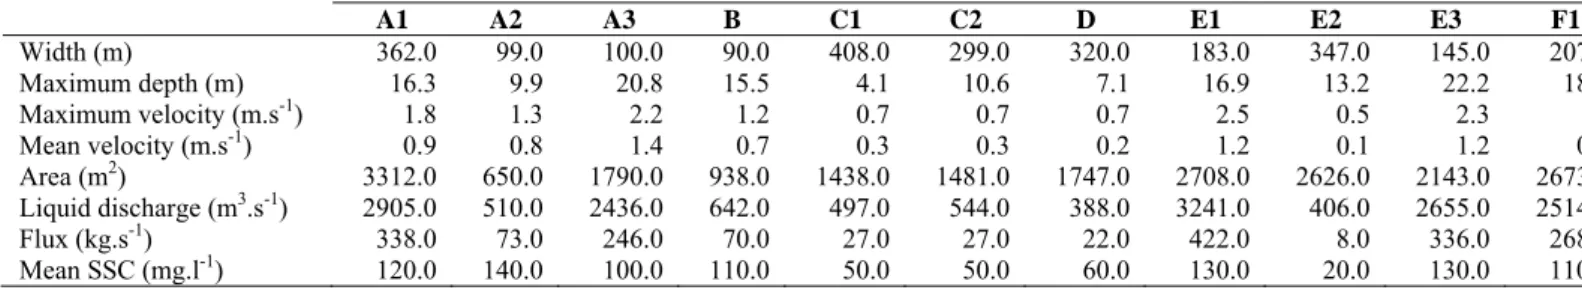 Table 1 - Hydrodynamical and sedimentary parameters in investigated cross-sections